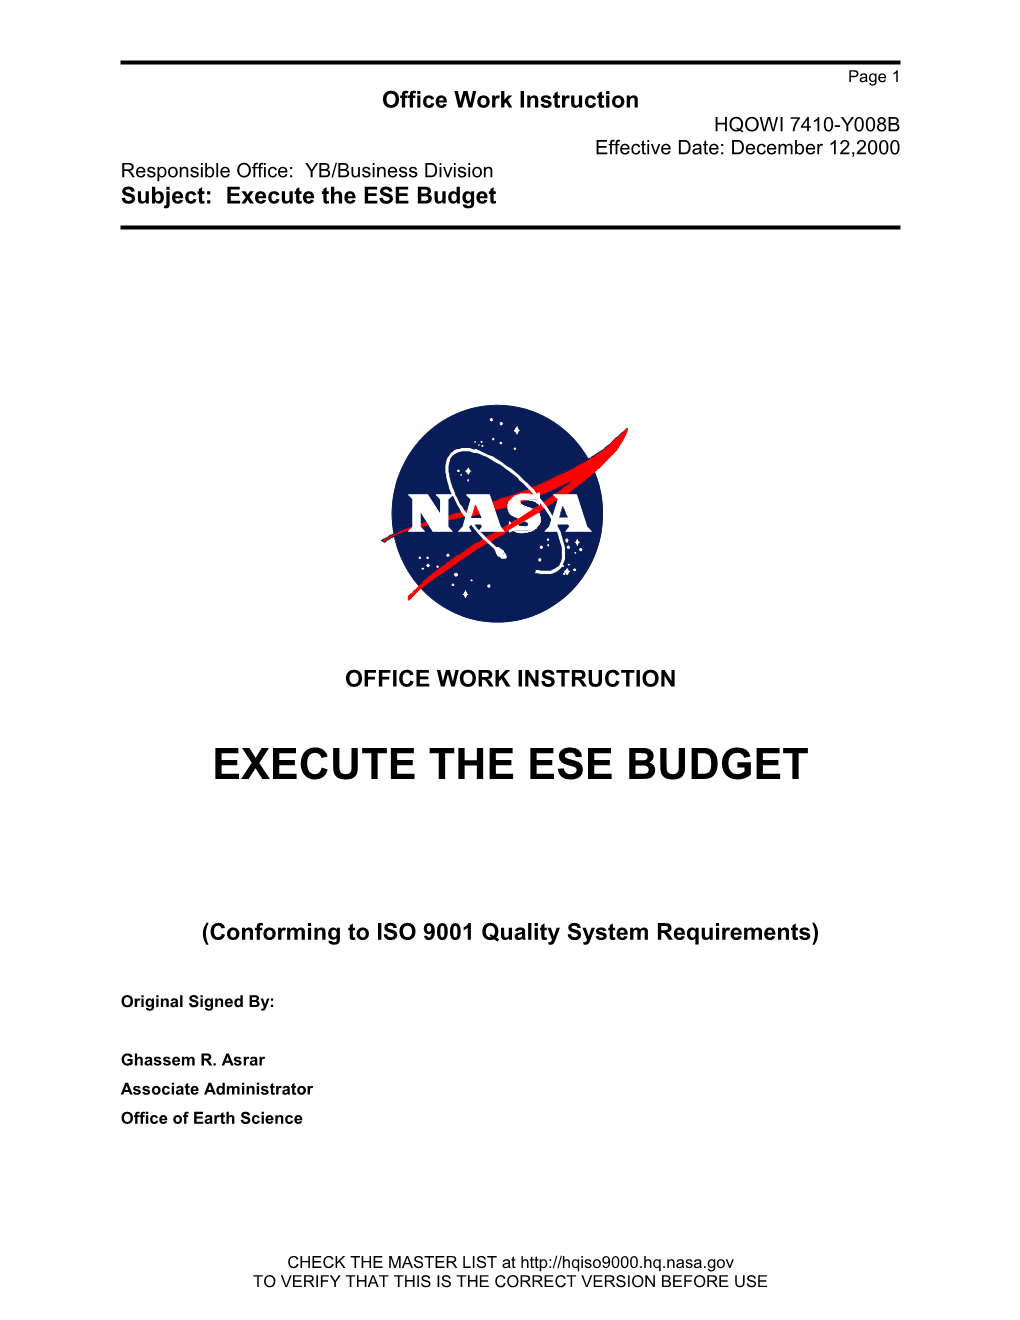 Execute the ESE Budget